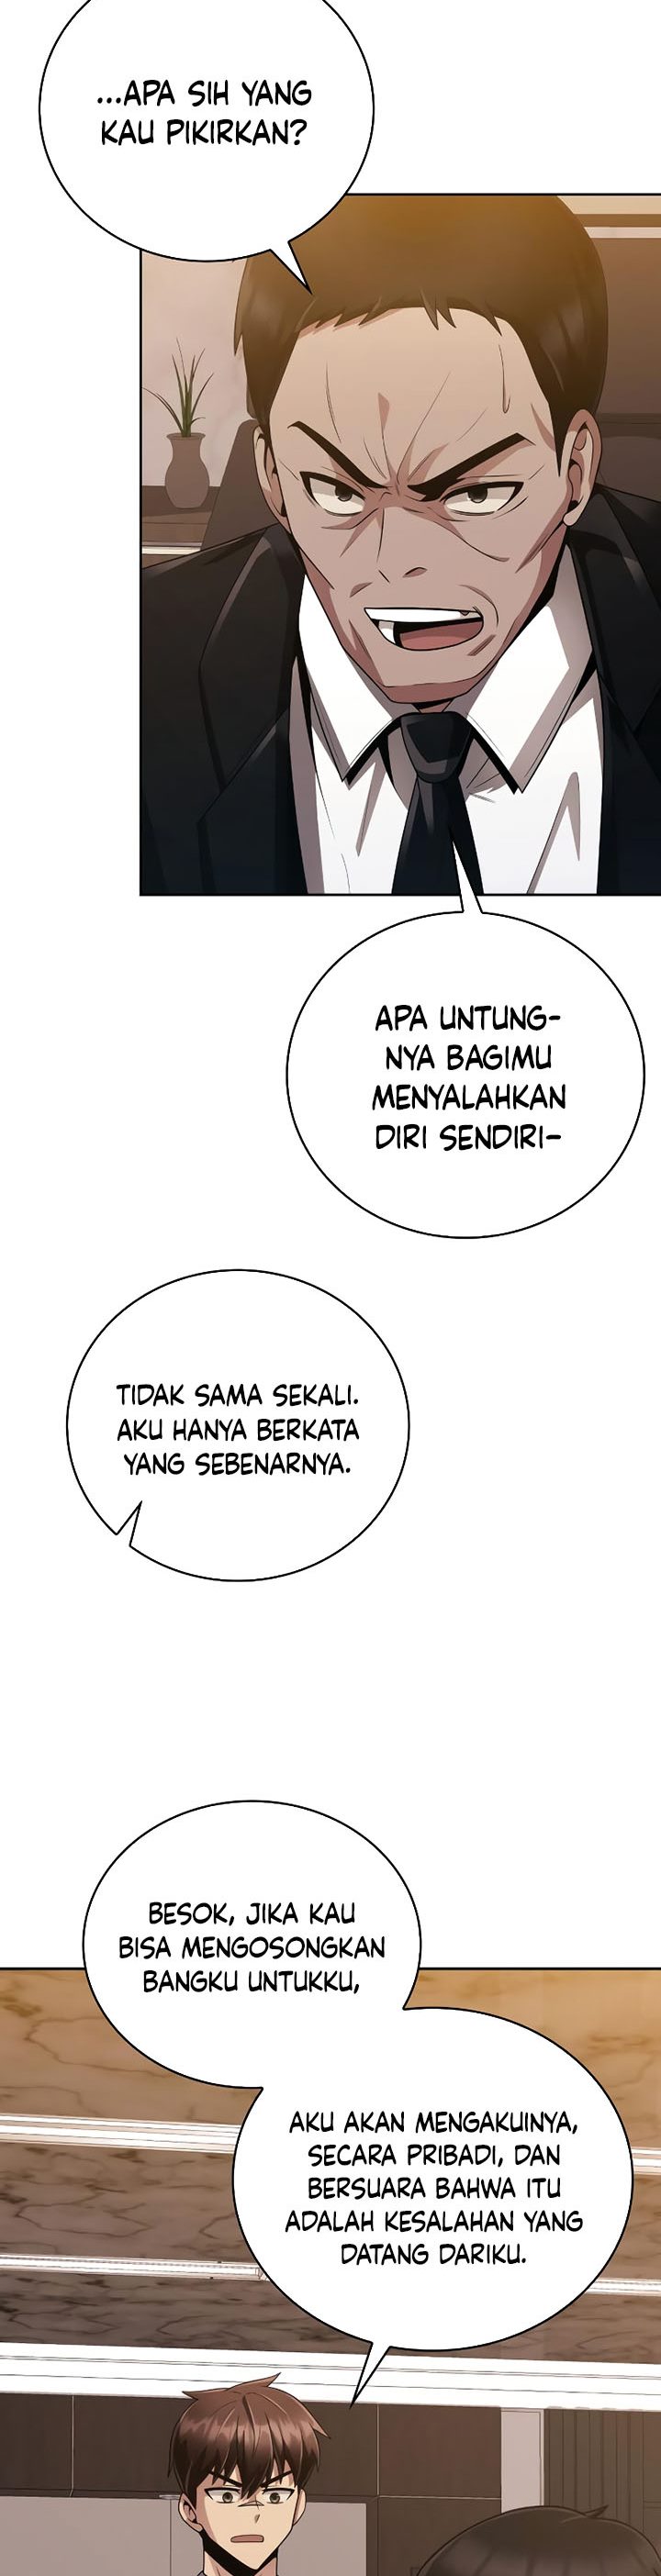 Dilarang COPAS - situs resmi www.mangacanblog.com - Komik clever cleaning life of the returned genius hunter 019 - chapter 19 20 Indonesia clever cleaning life of the returned genius hunter 019 - chapter 19 Terbaru 35|Baca Manga Komik Indonesia|Mangacan